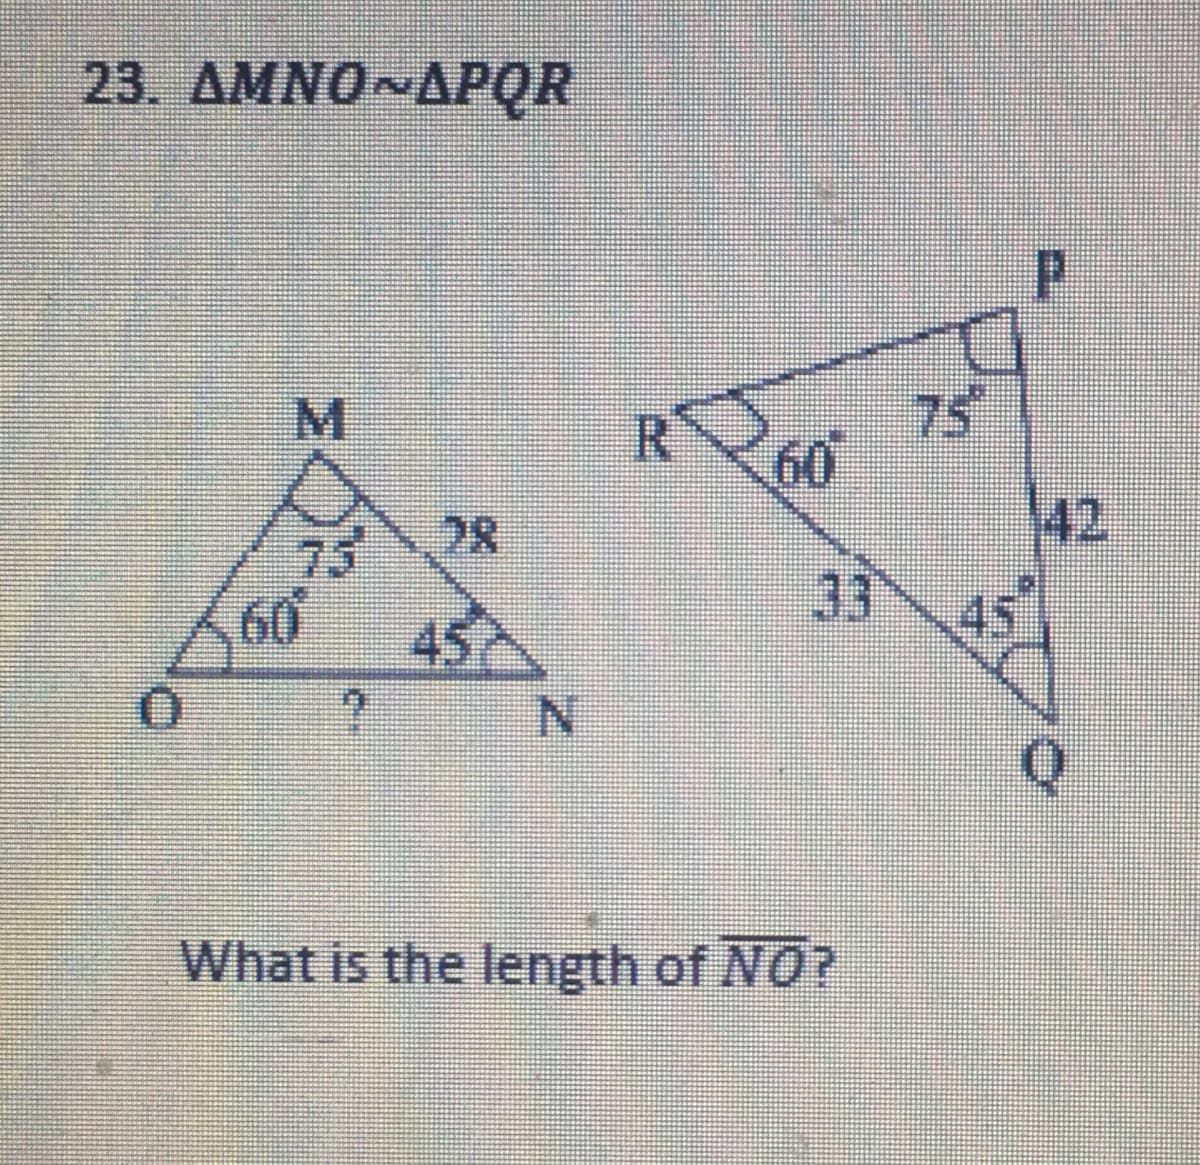 23. AMNO APQR
75
60
28
42
45
33
45
What is the length of NO?
8.
